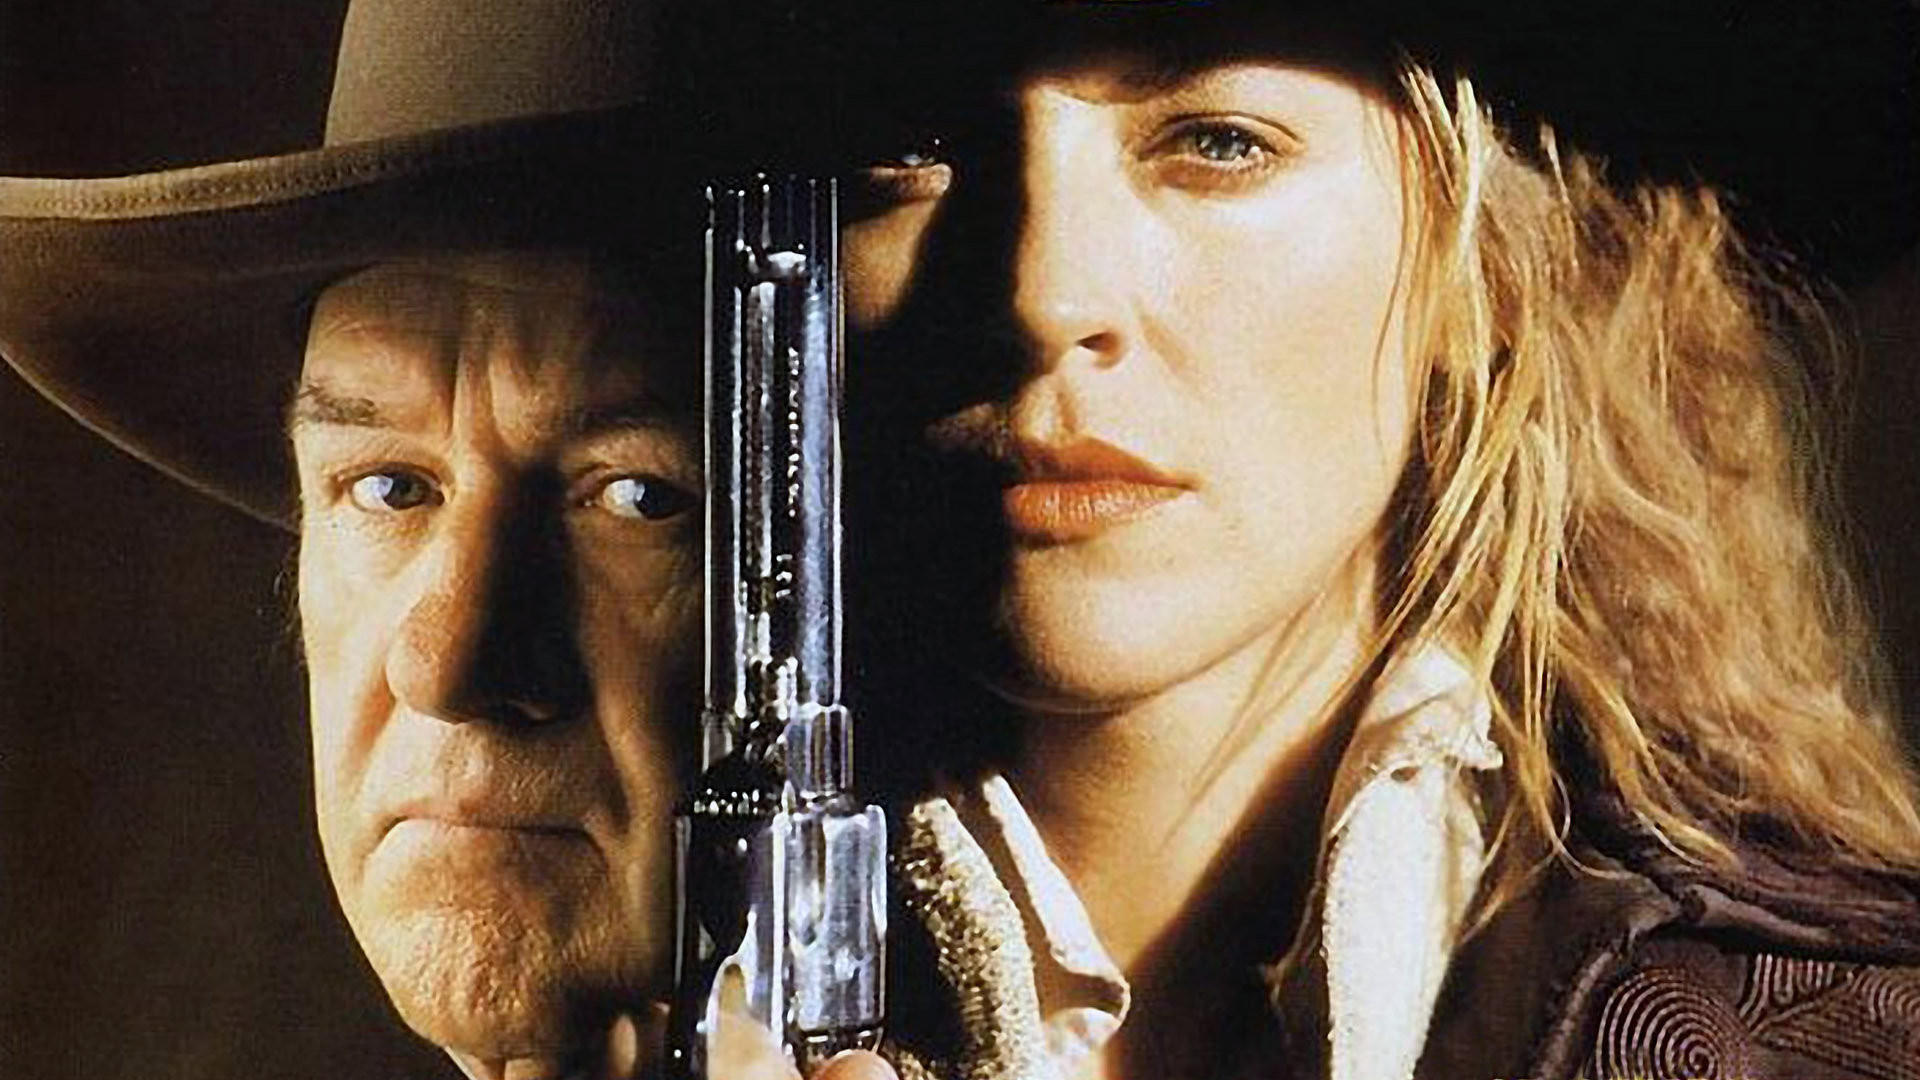 The Quick and the Dead (1995) Review – A Hidden Gem?